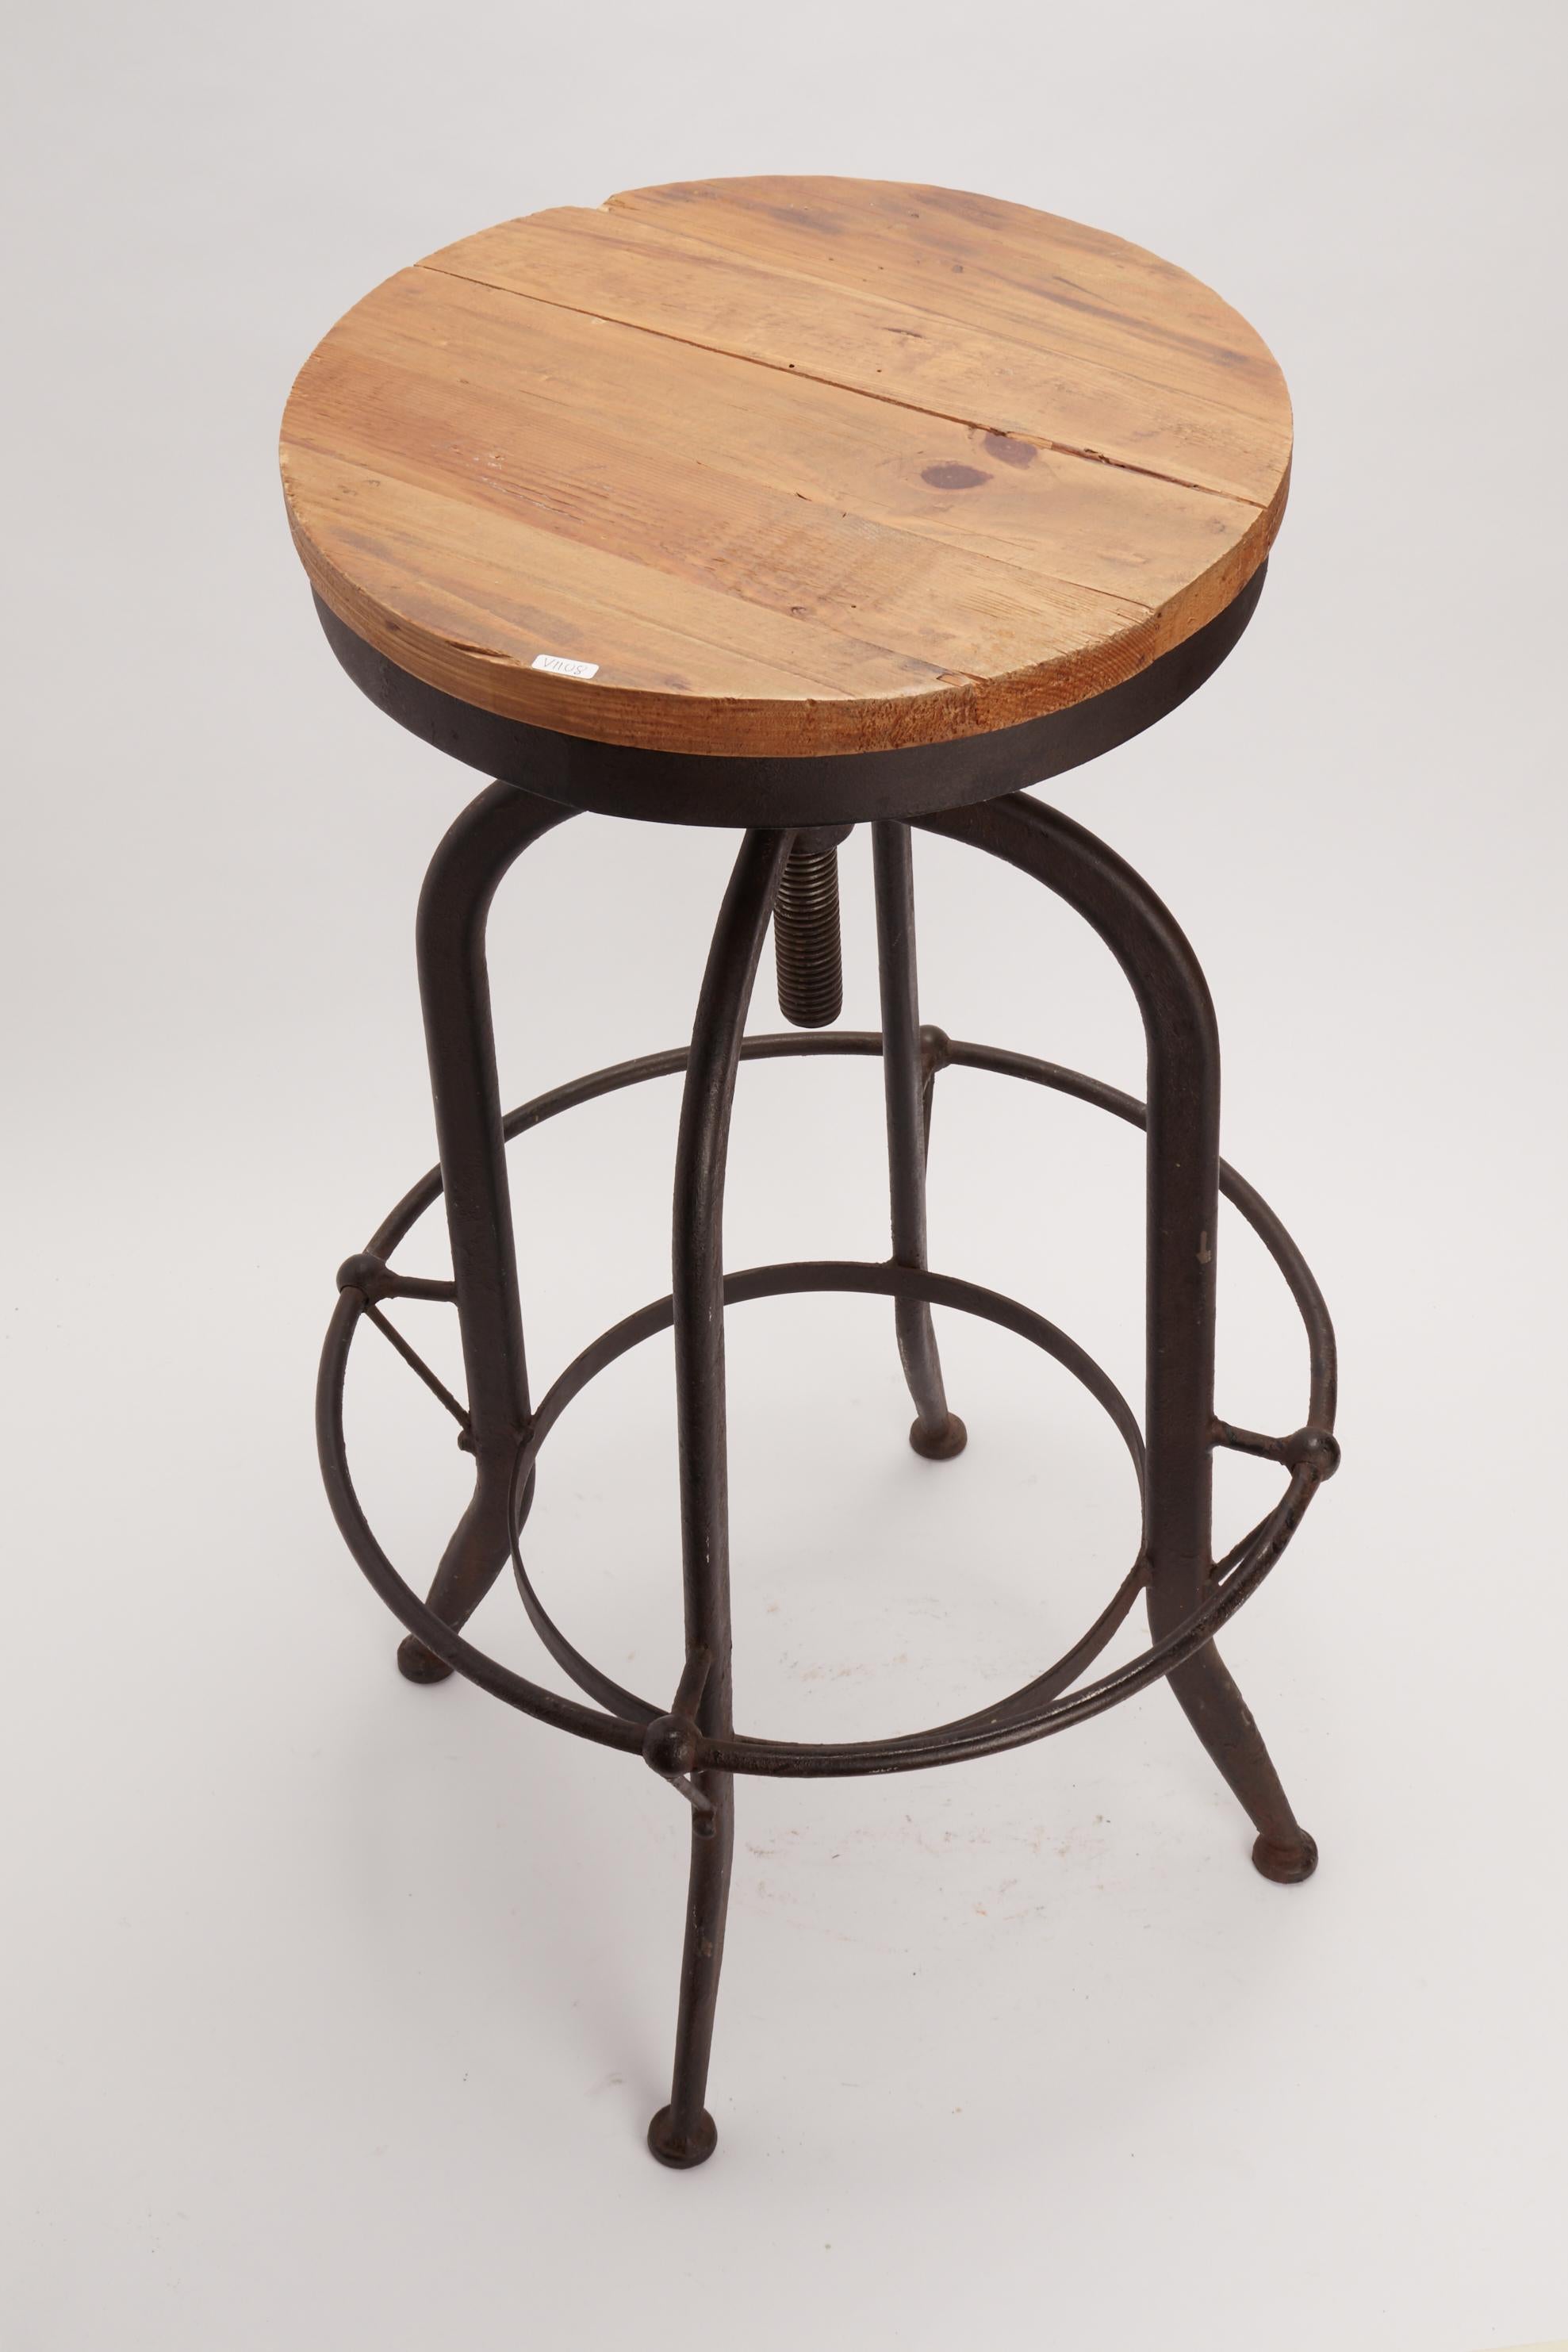 Pair of Industrial Stools and Wooden Seats, Italy, 1930 In Excellent Condition For Sale In Milan, IT